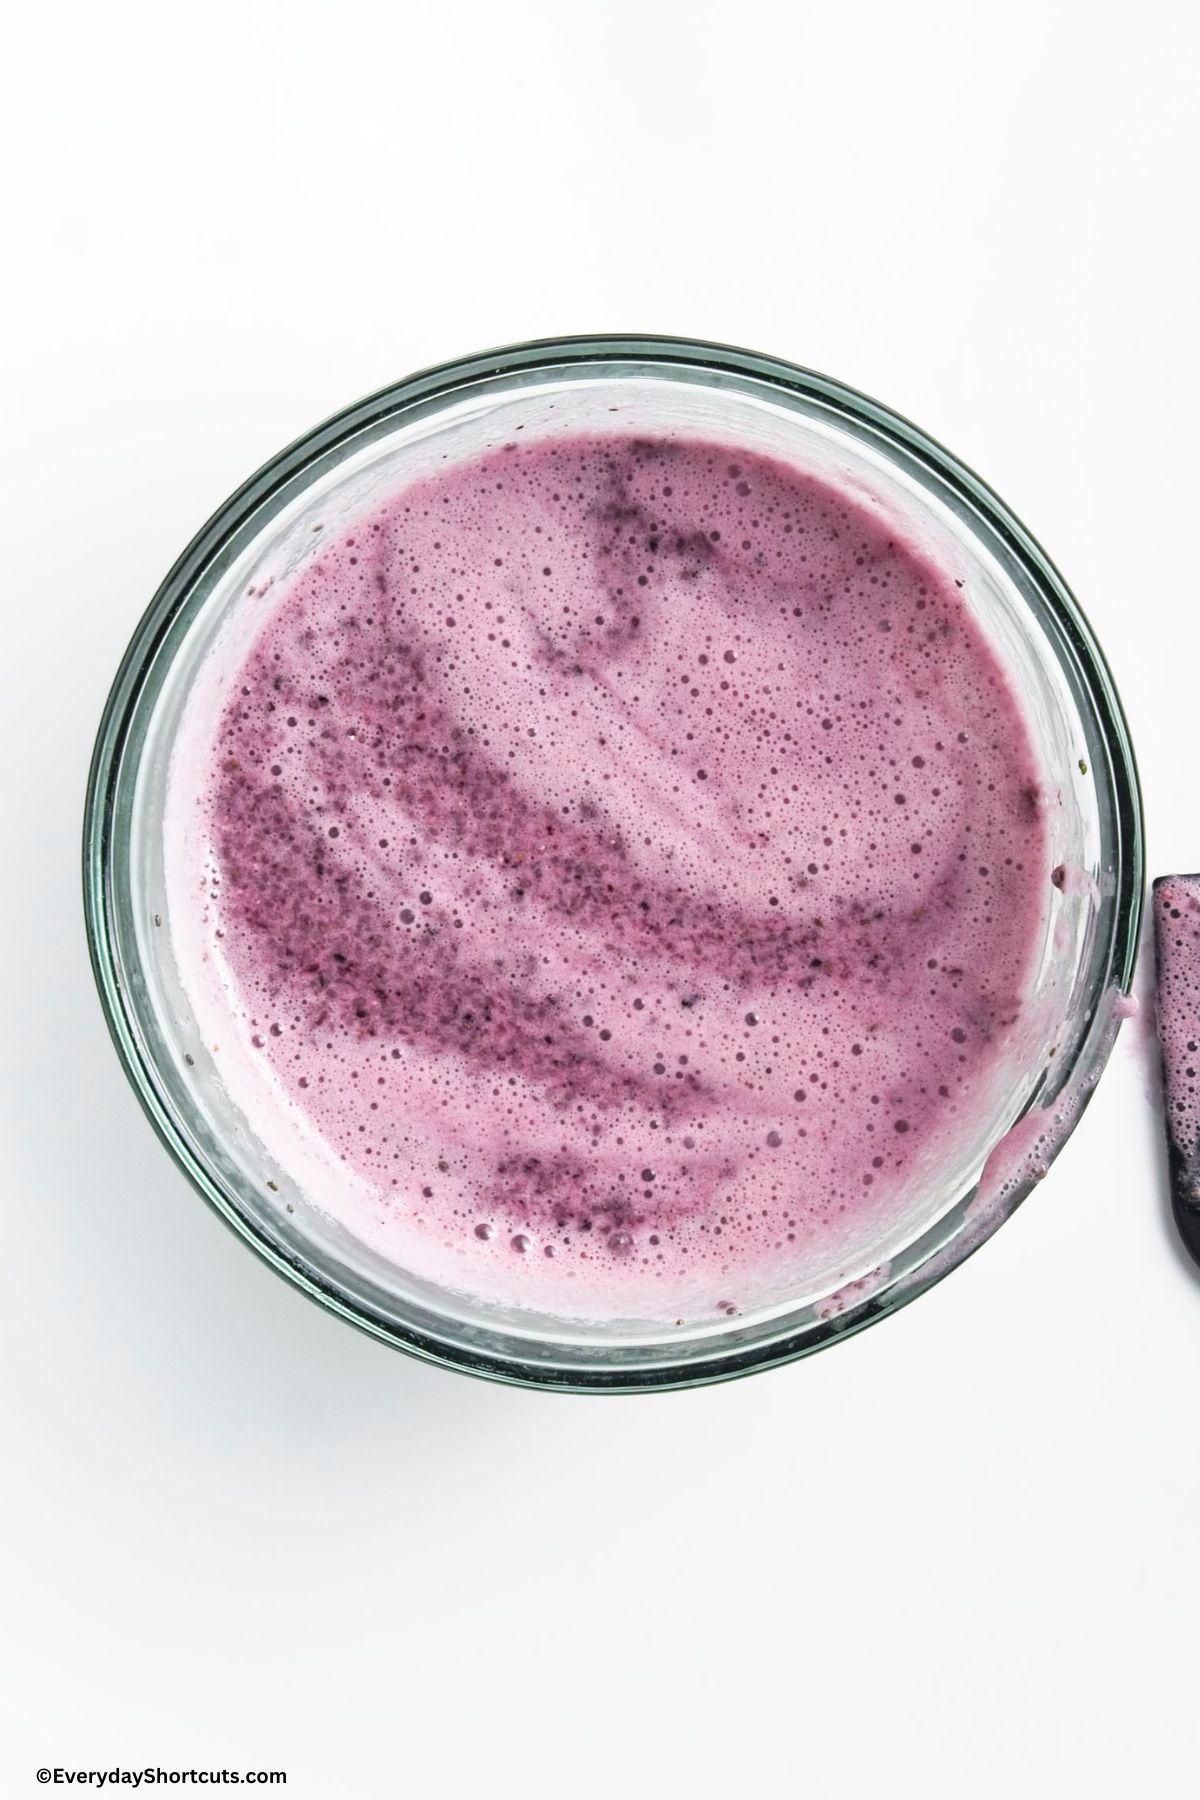 chia seeds in a blender with blueberry mix